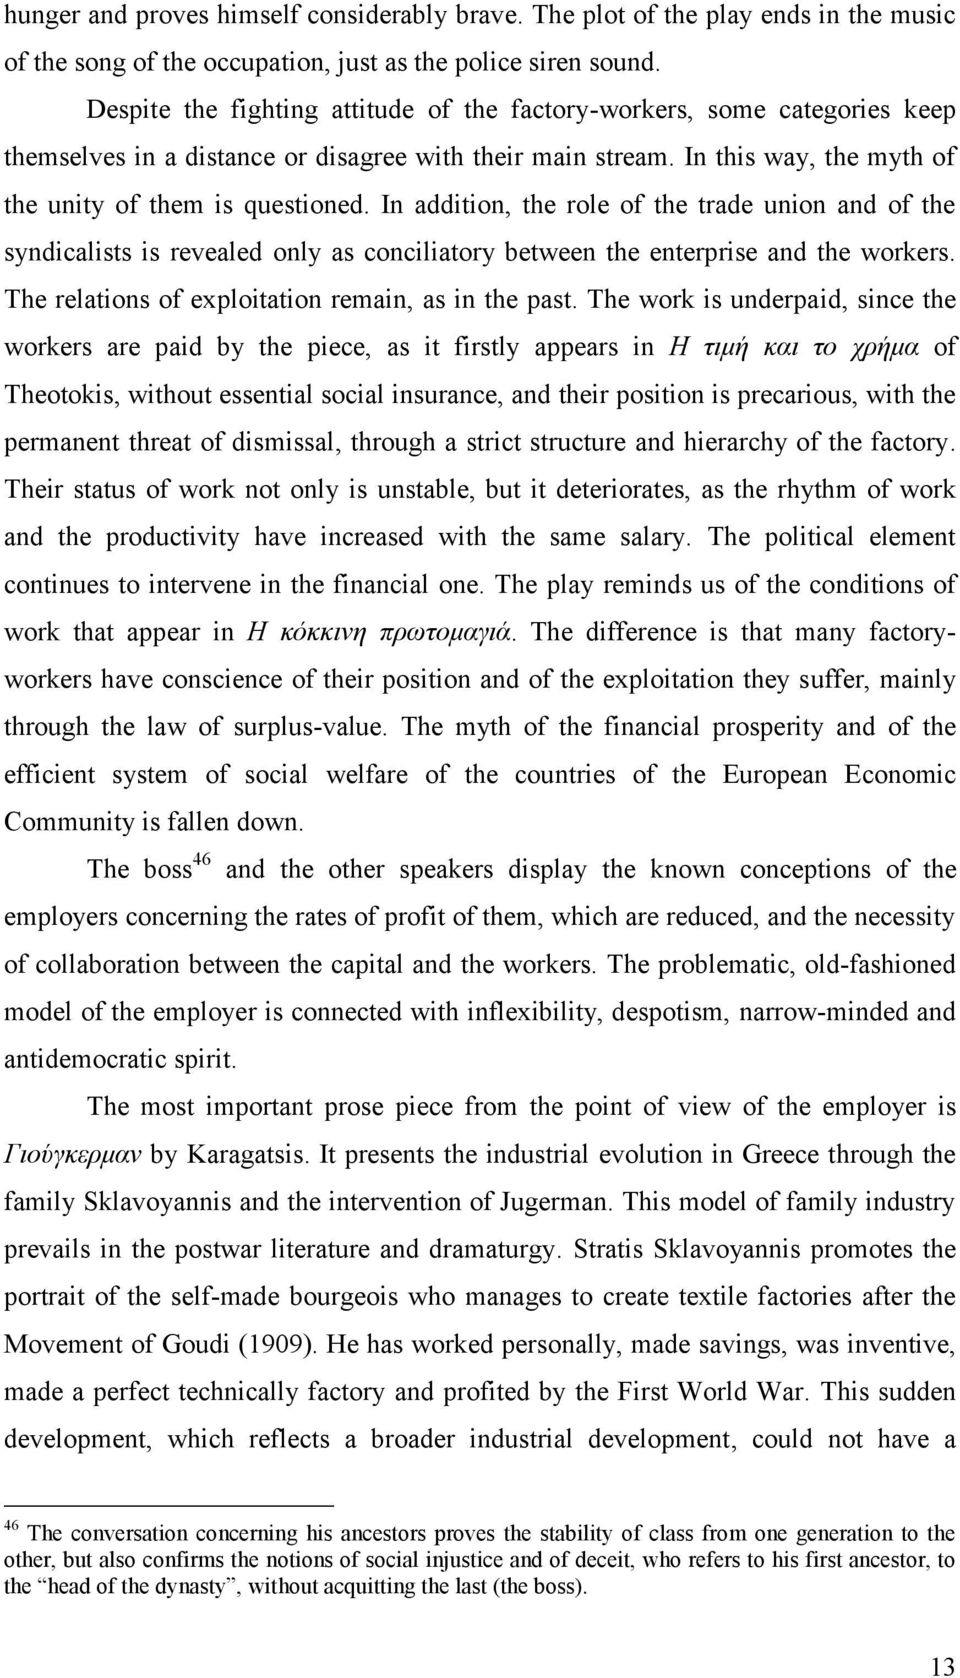 In addition, the role of the trade union and of the syndicalists is revealed only as conciliatory between the enterprise and the workers. The relations of exploitation remain, as in the past.